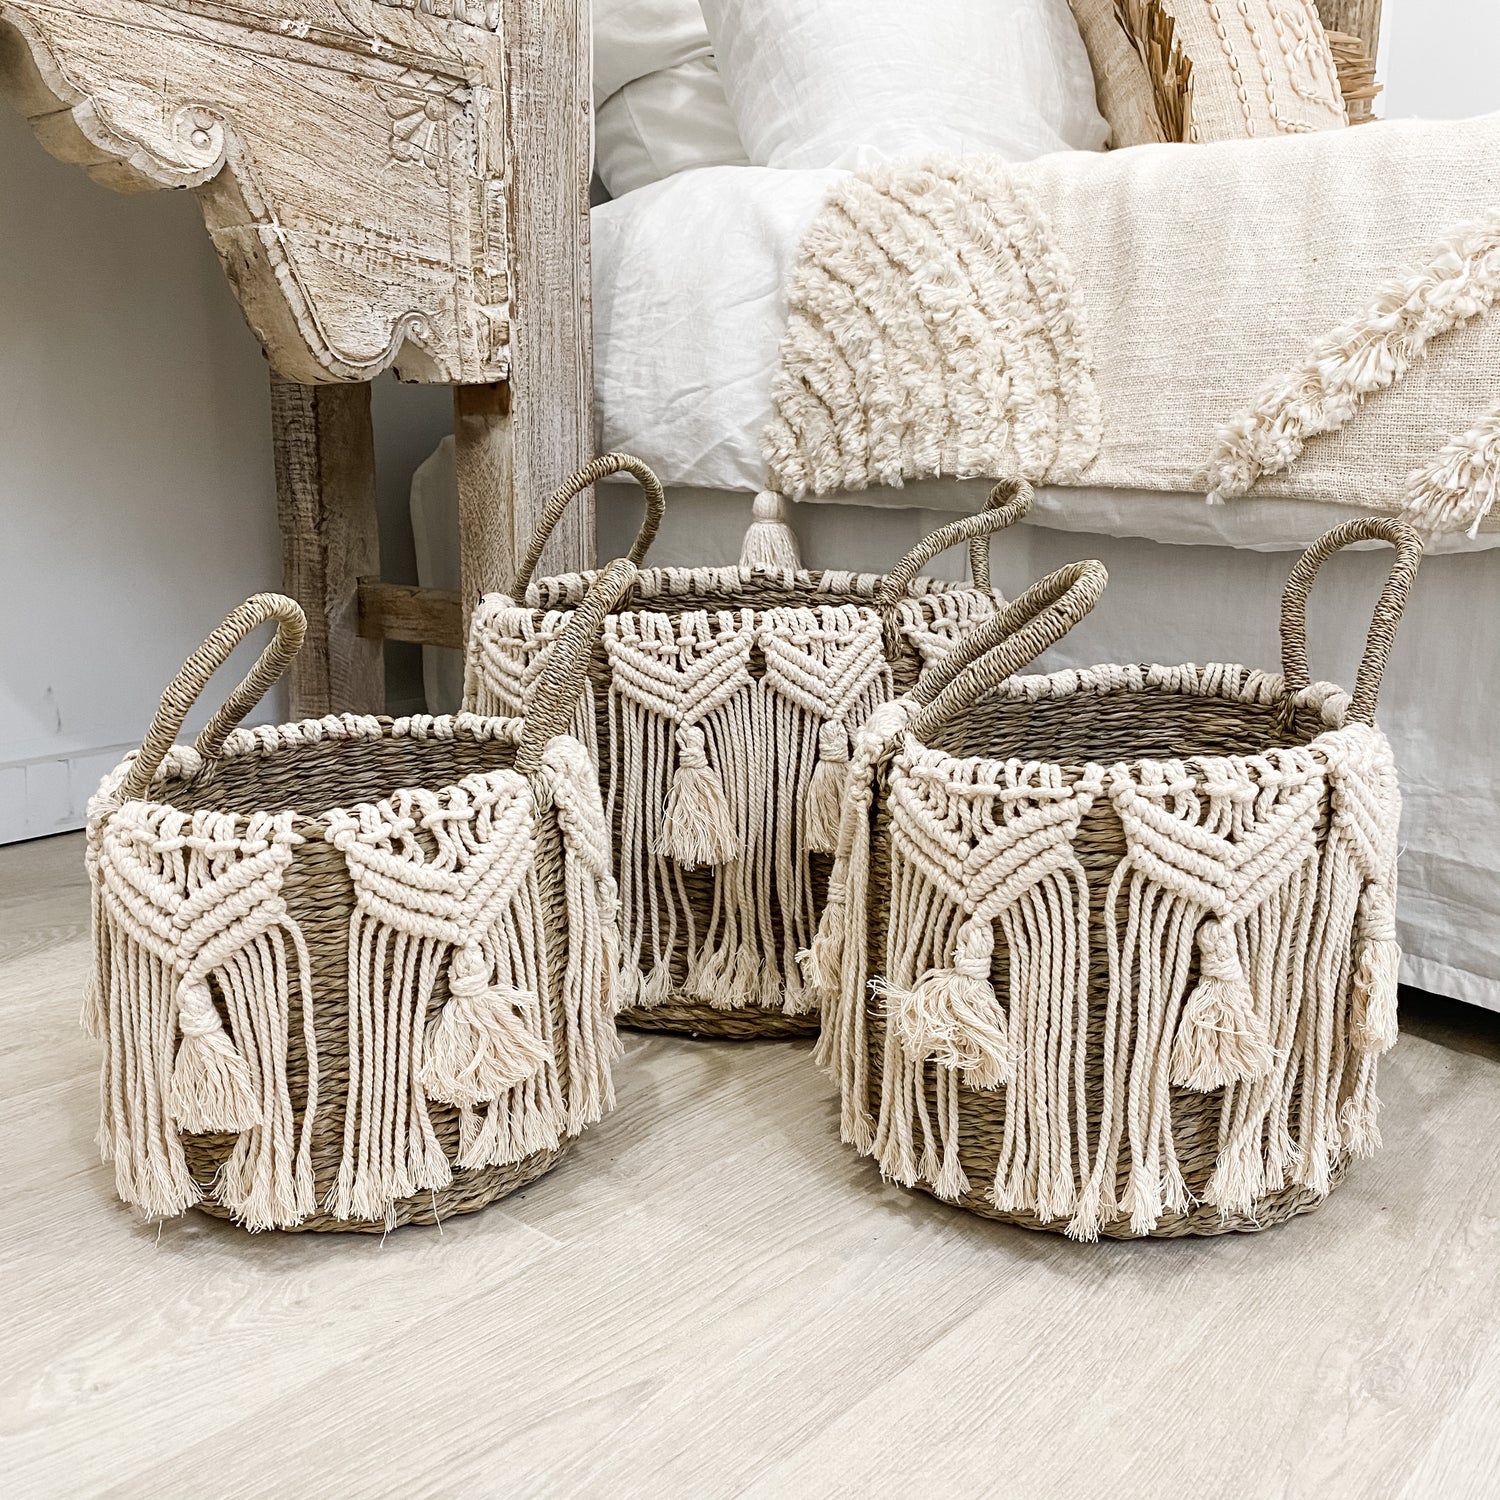 Summer Breeze Baskets handwoven with seagrass featuring macrame embellishment